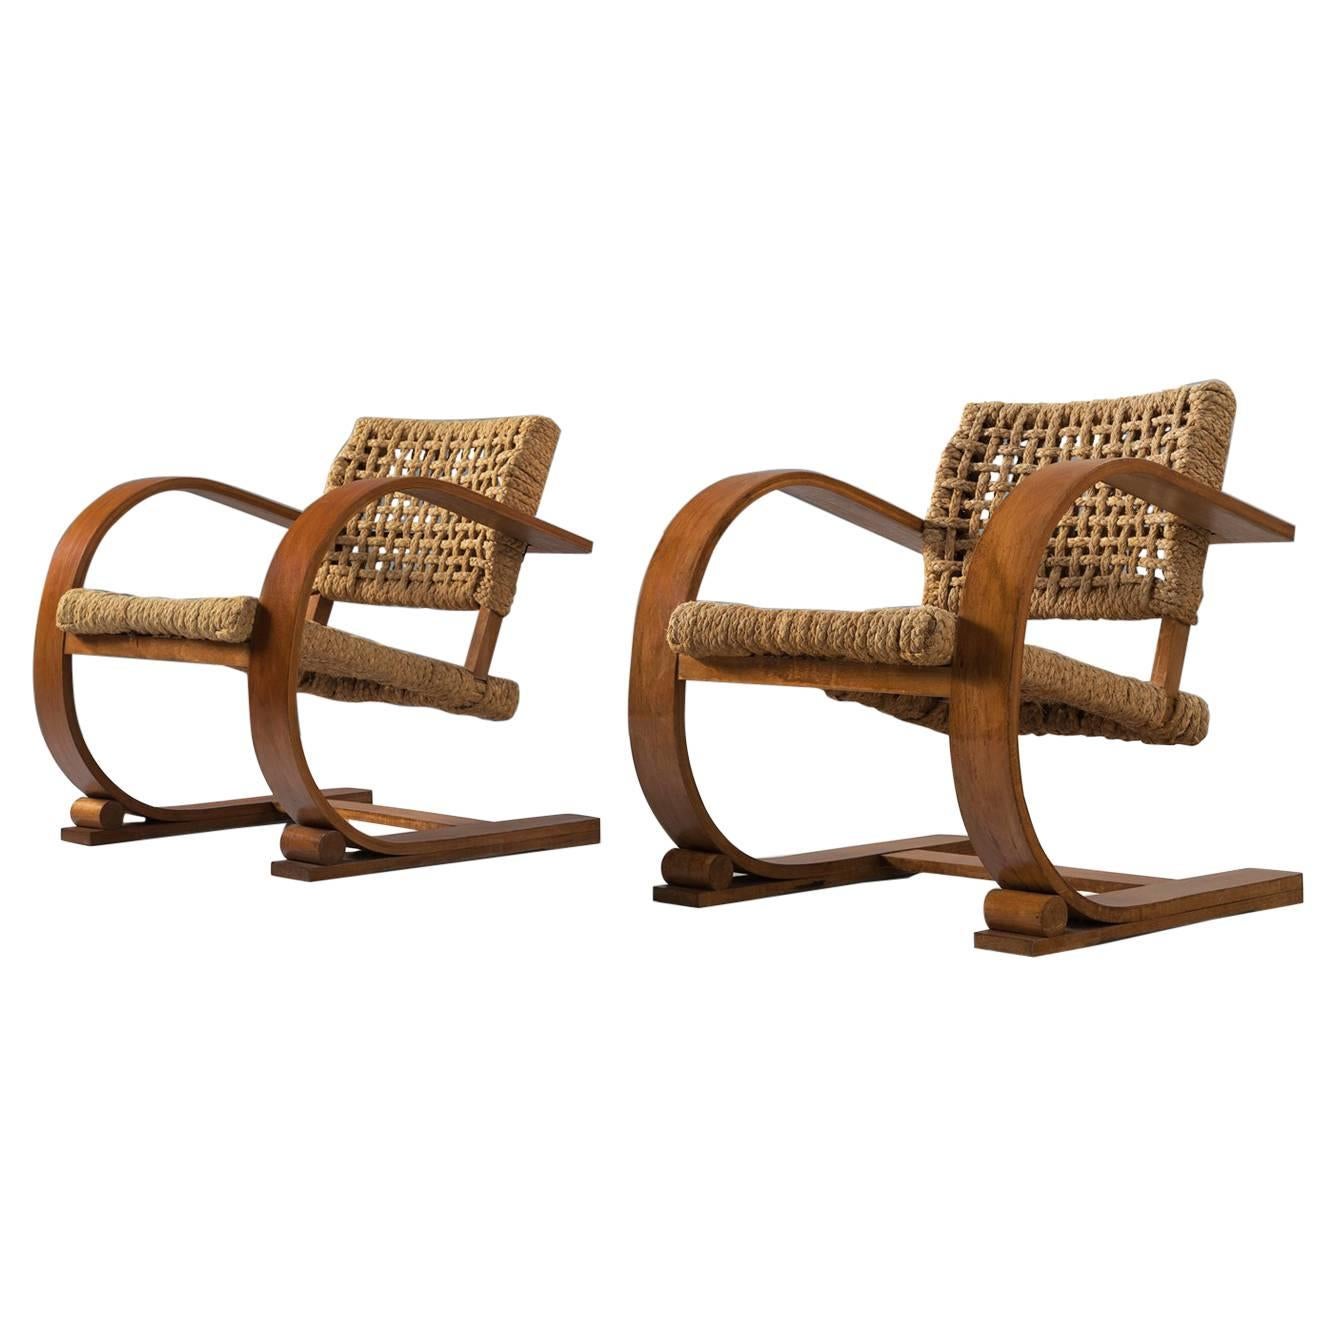 Set of Two Rope Chairs by Audoux-Minet for Vibo